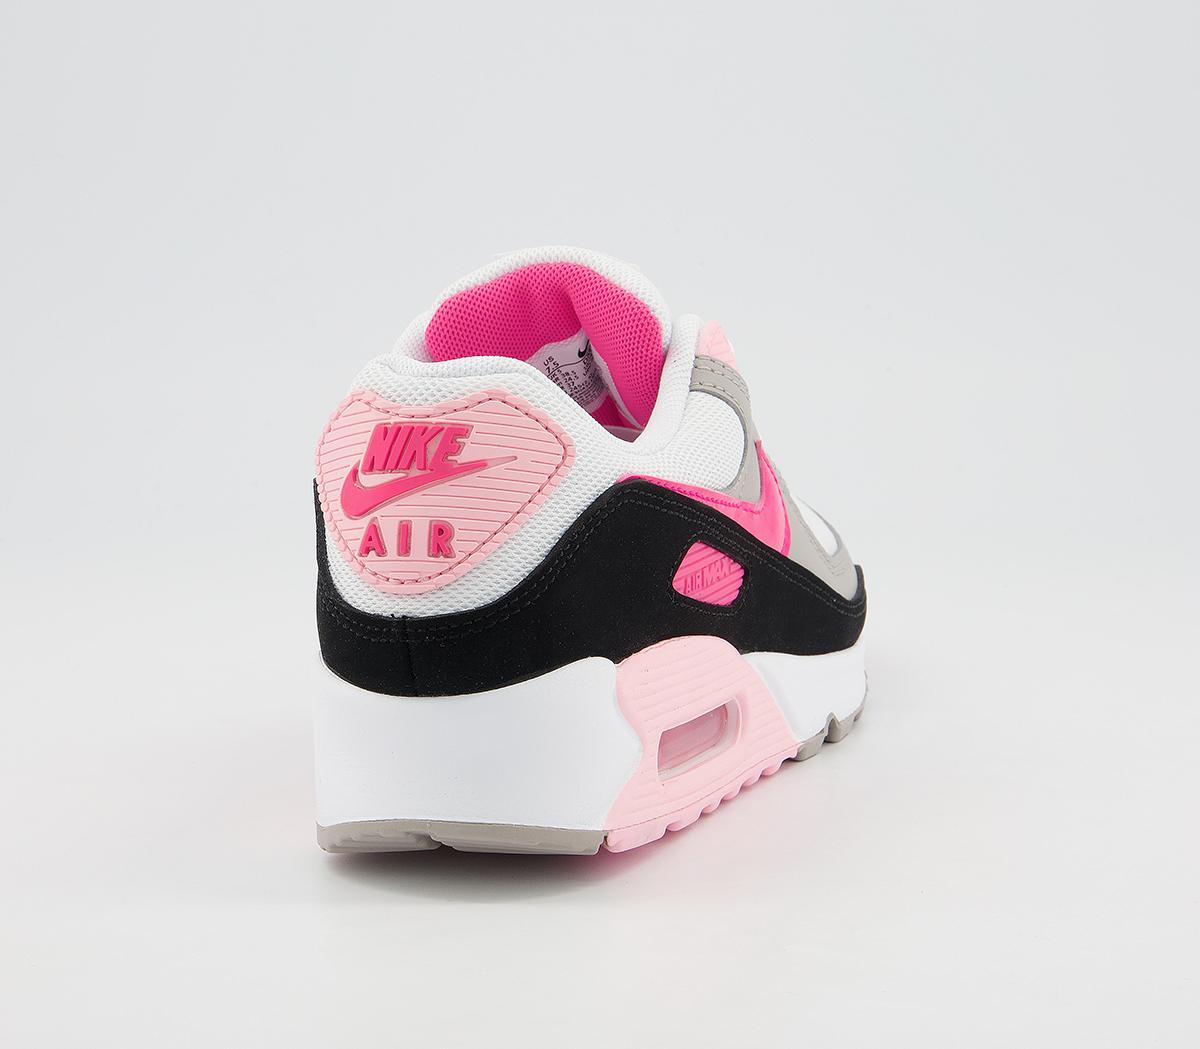 Nike Air Max 90 Trainers White Hyper Pink Black College Grey - Women's ...